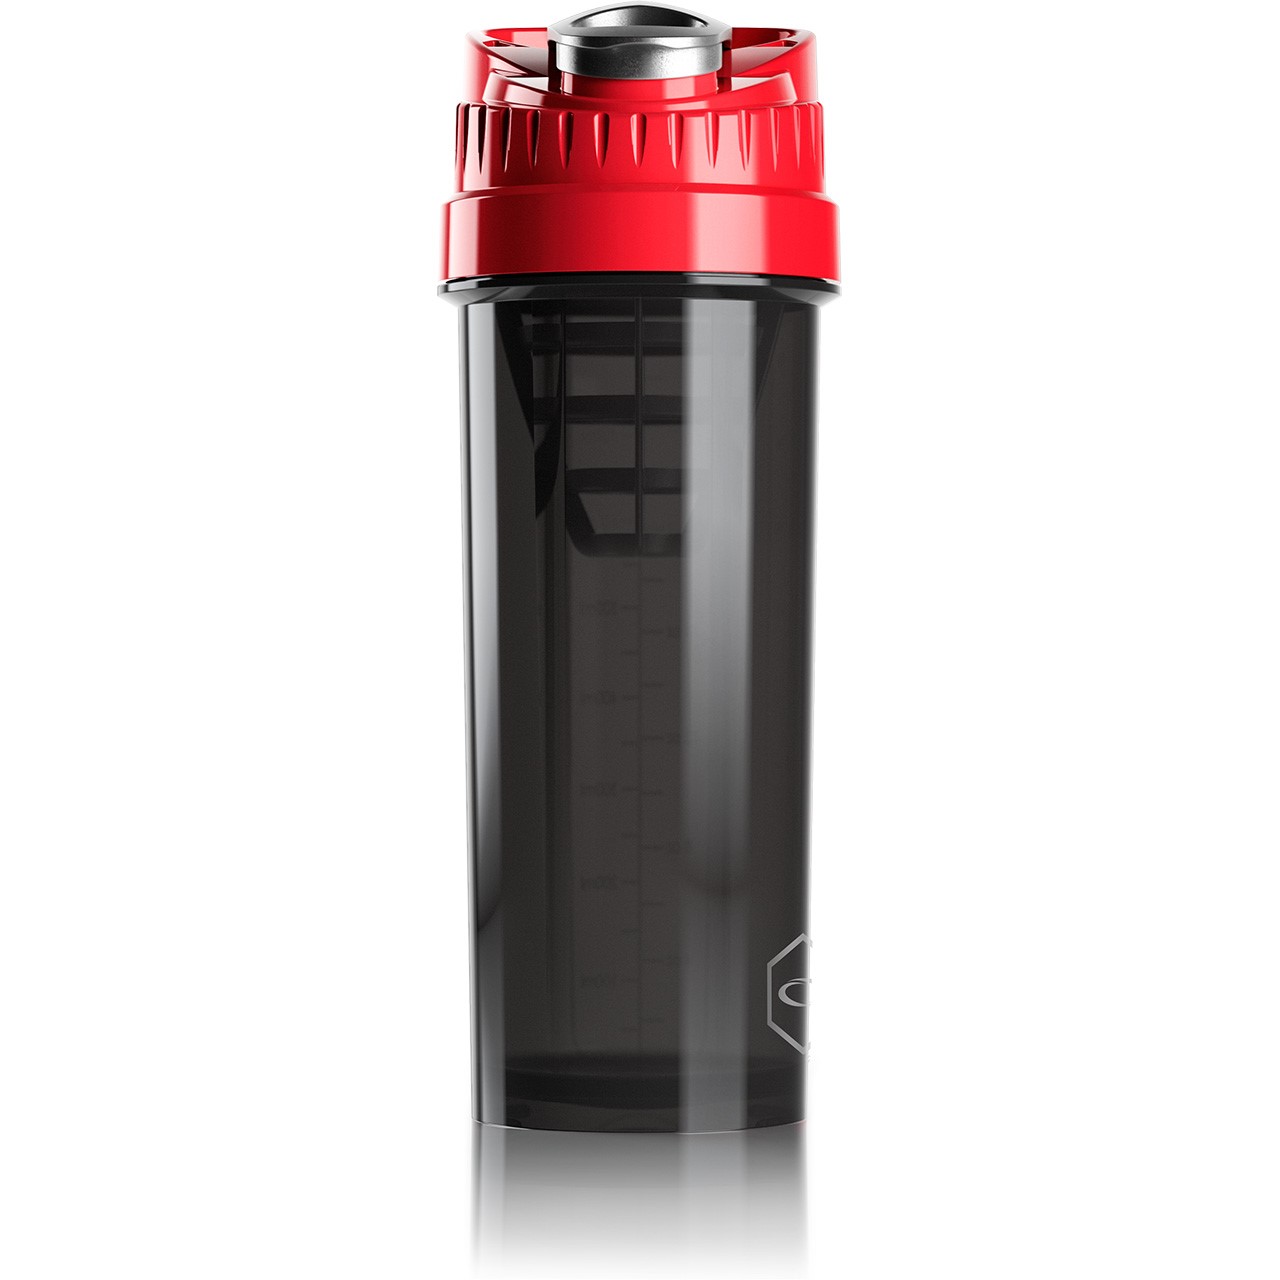 New Protein Shaker Cyclone Cup Red 950 ml